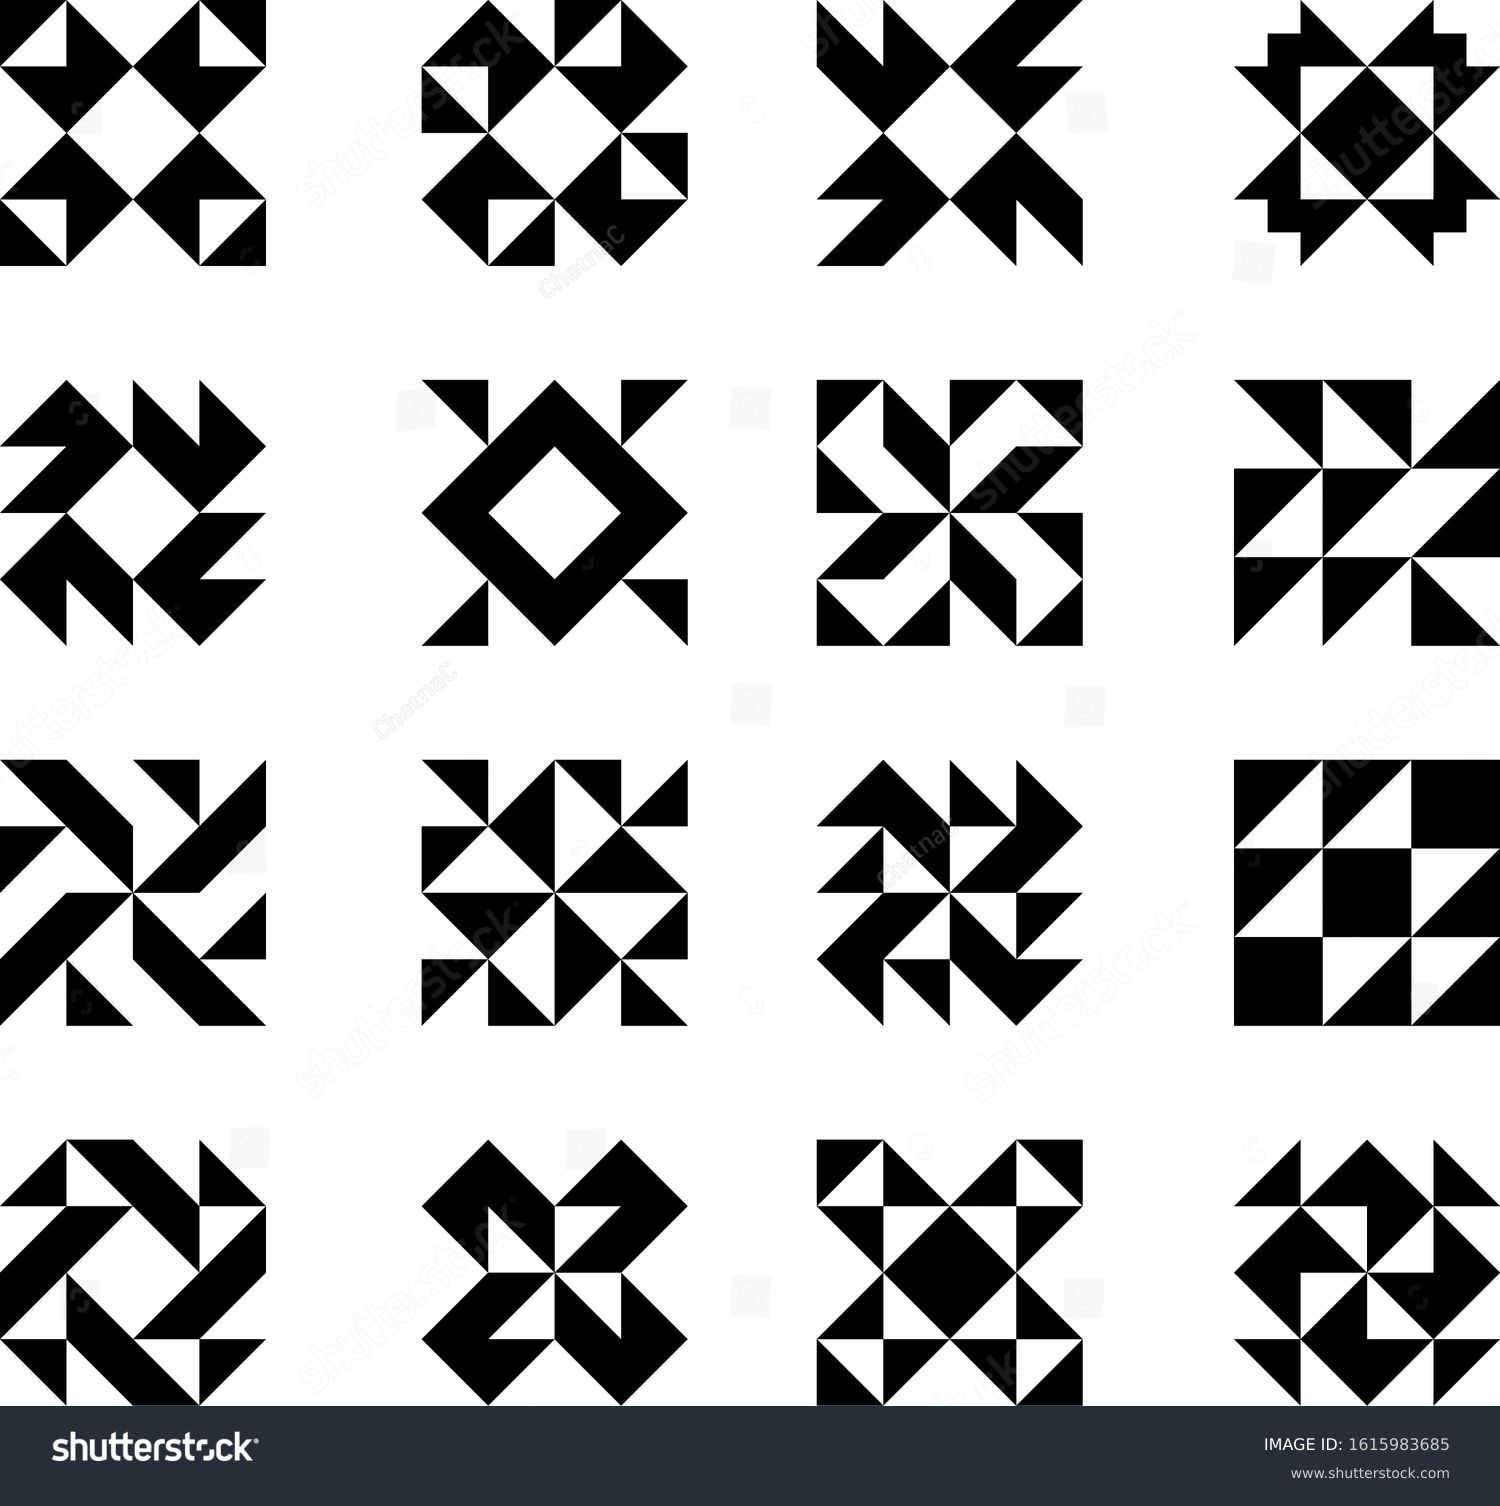 SVG of Barn quilt pattern collection, Amish Patchwork design, Abstract geometric tiled Vector, Square block illustration svg